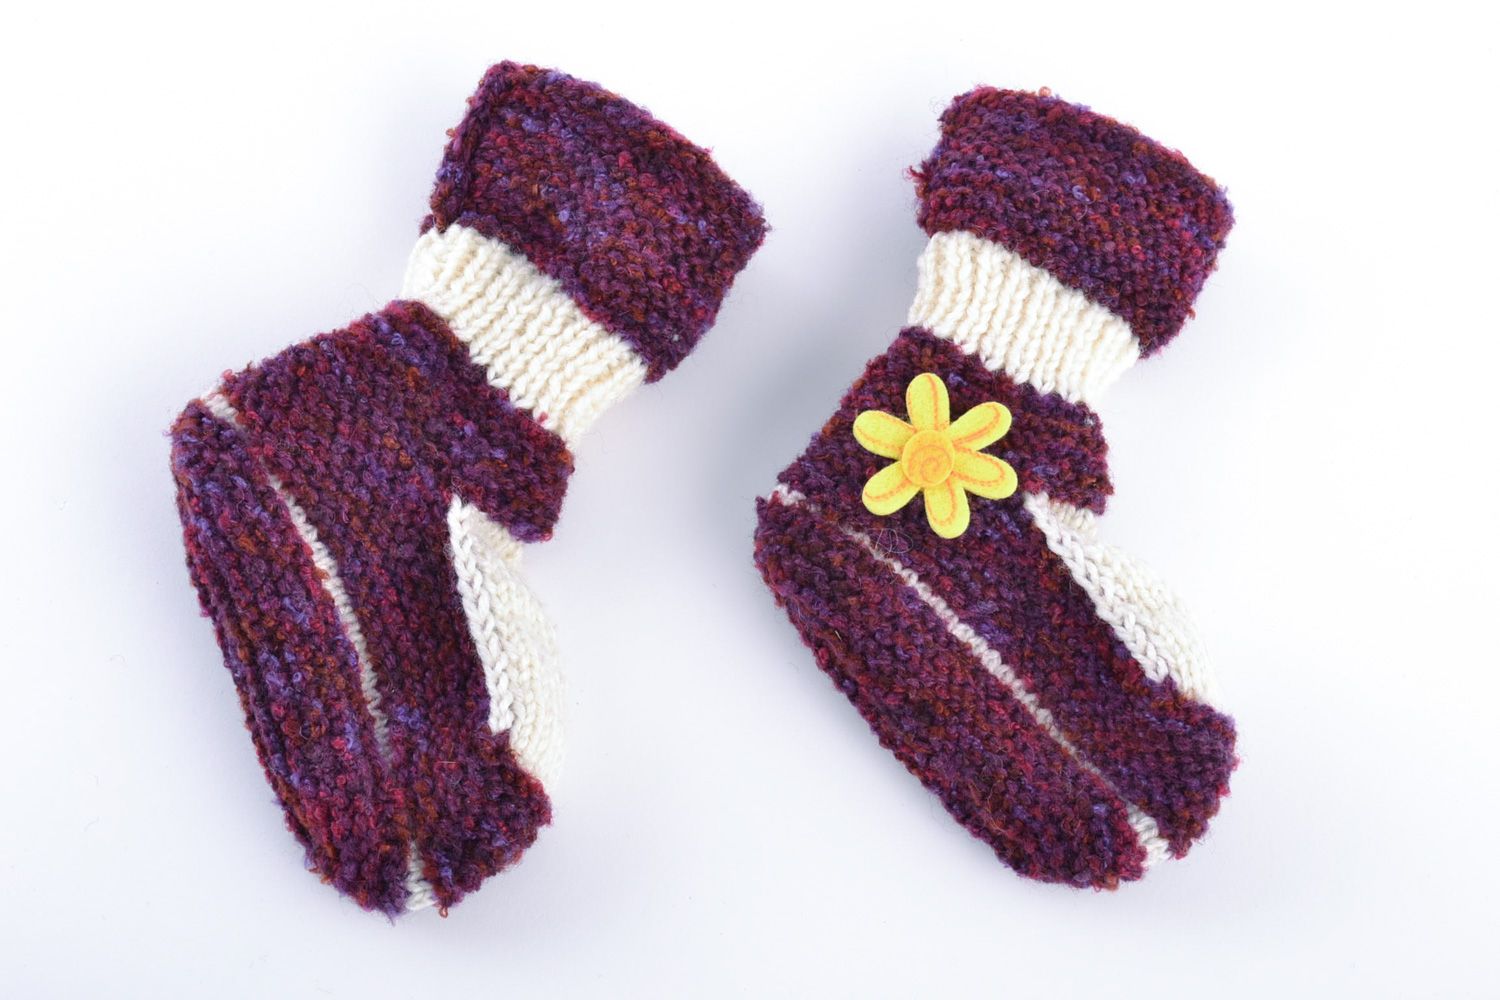 Handmade soft warm baby booties knitted of natural wool in white and violet colors photo 2